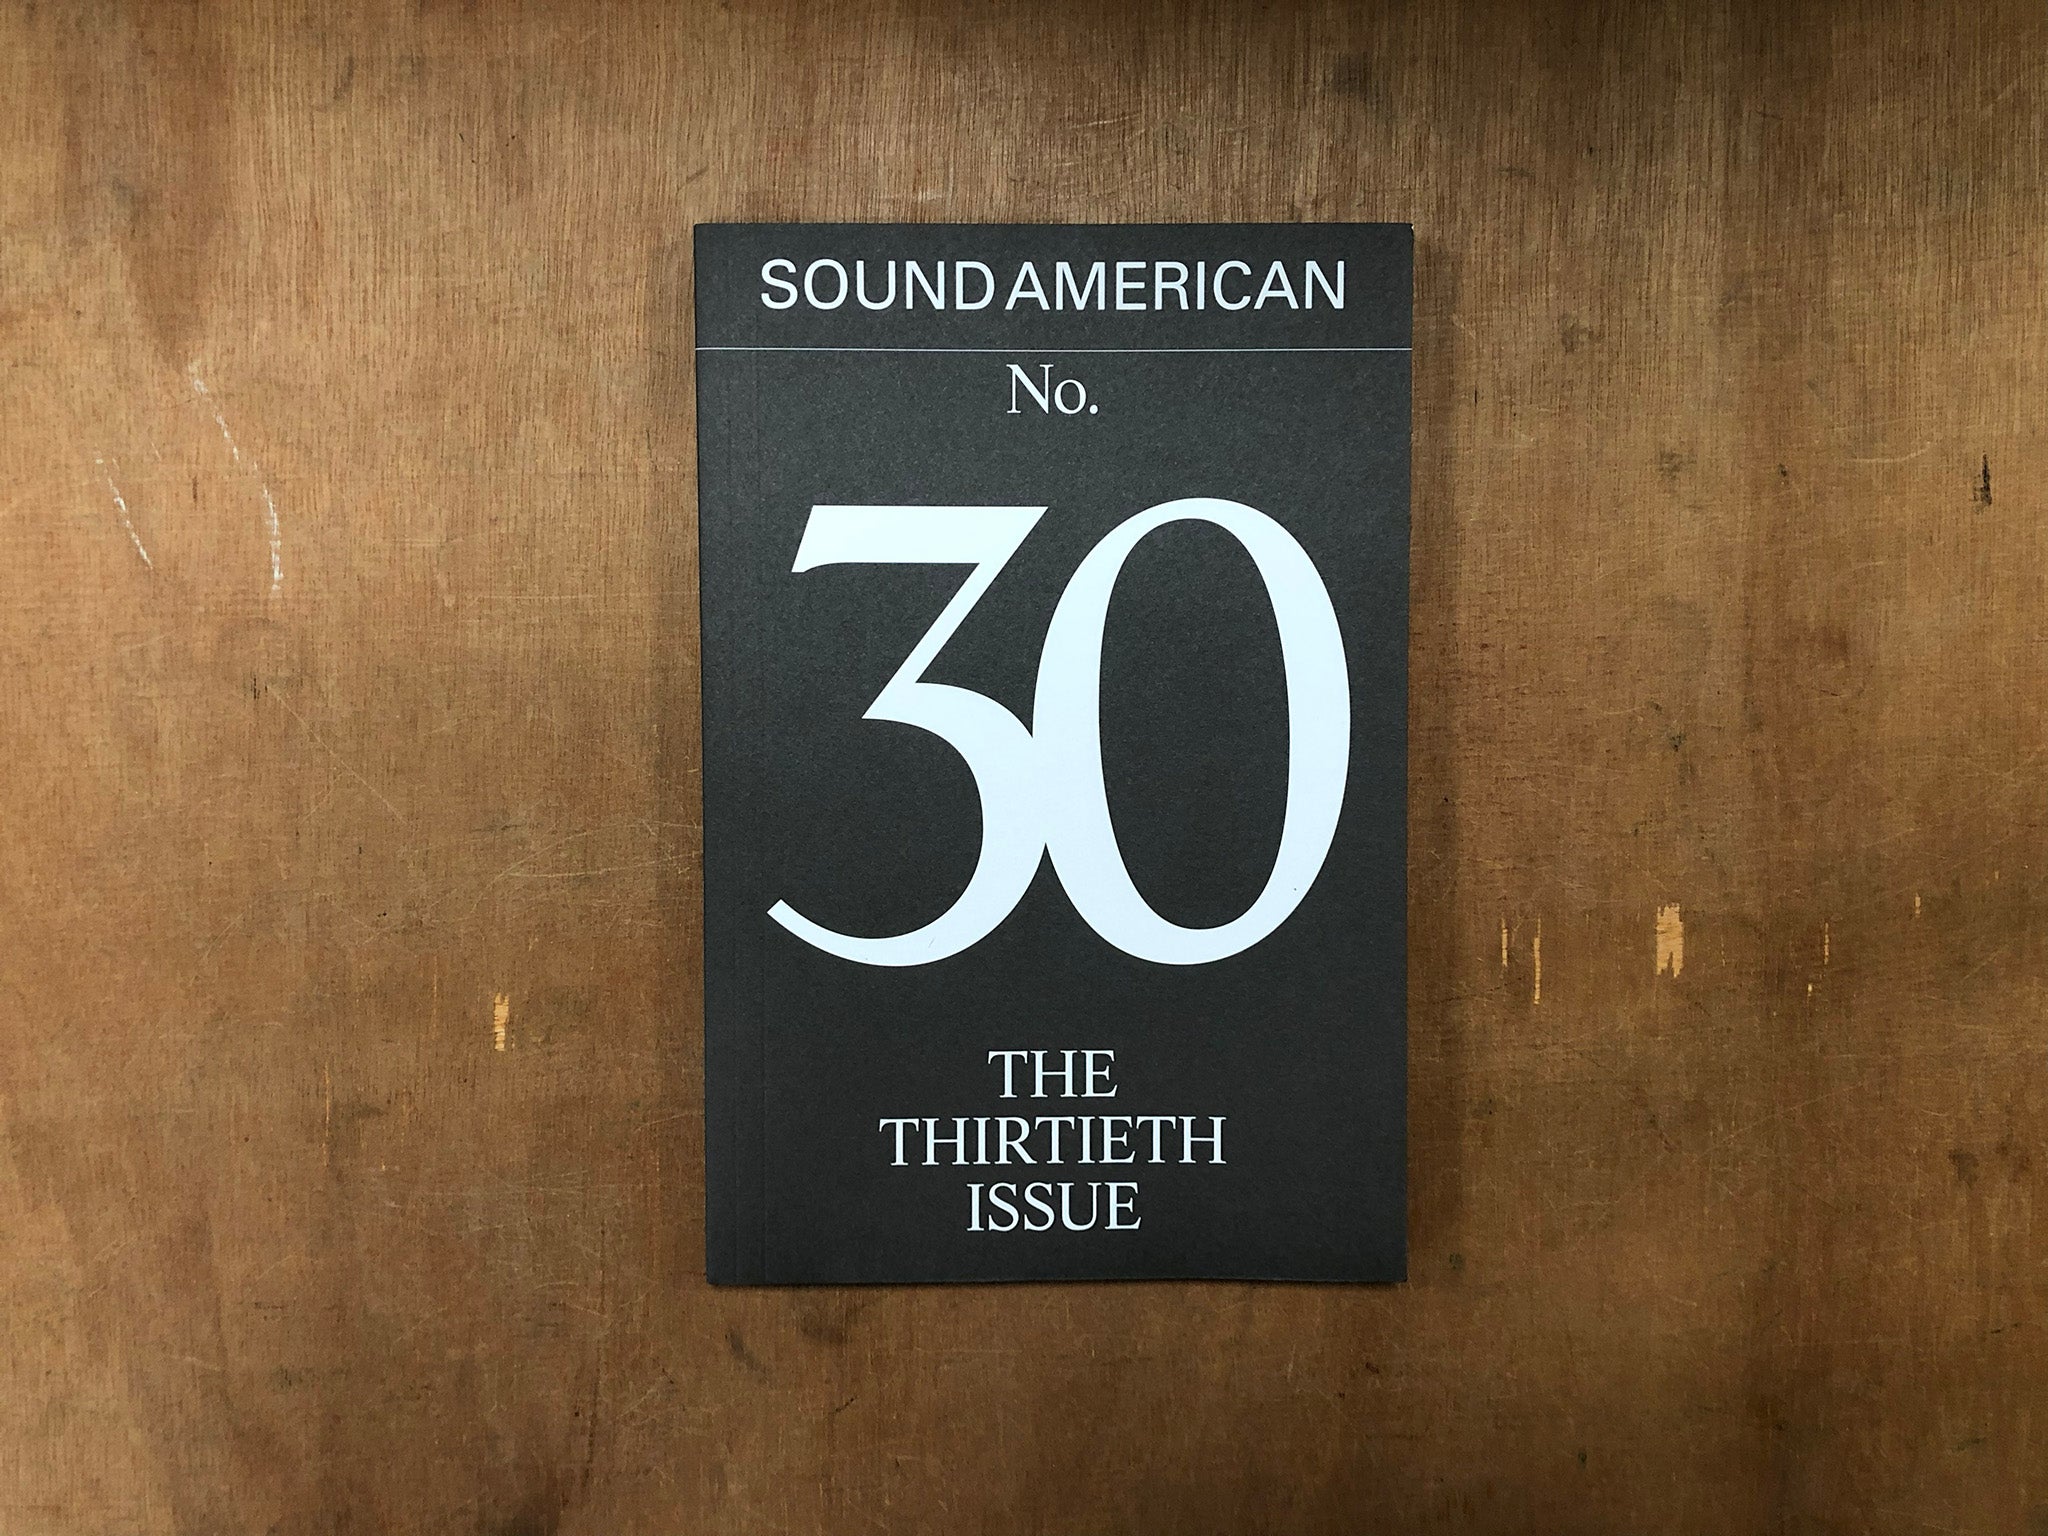 SOUND AMERICAN NO. 30: THE THIRTIETH ISSUE